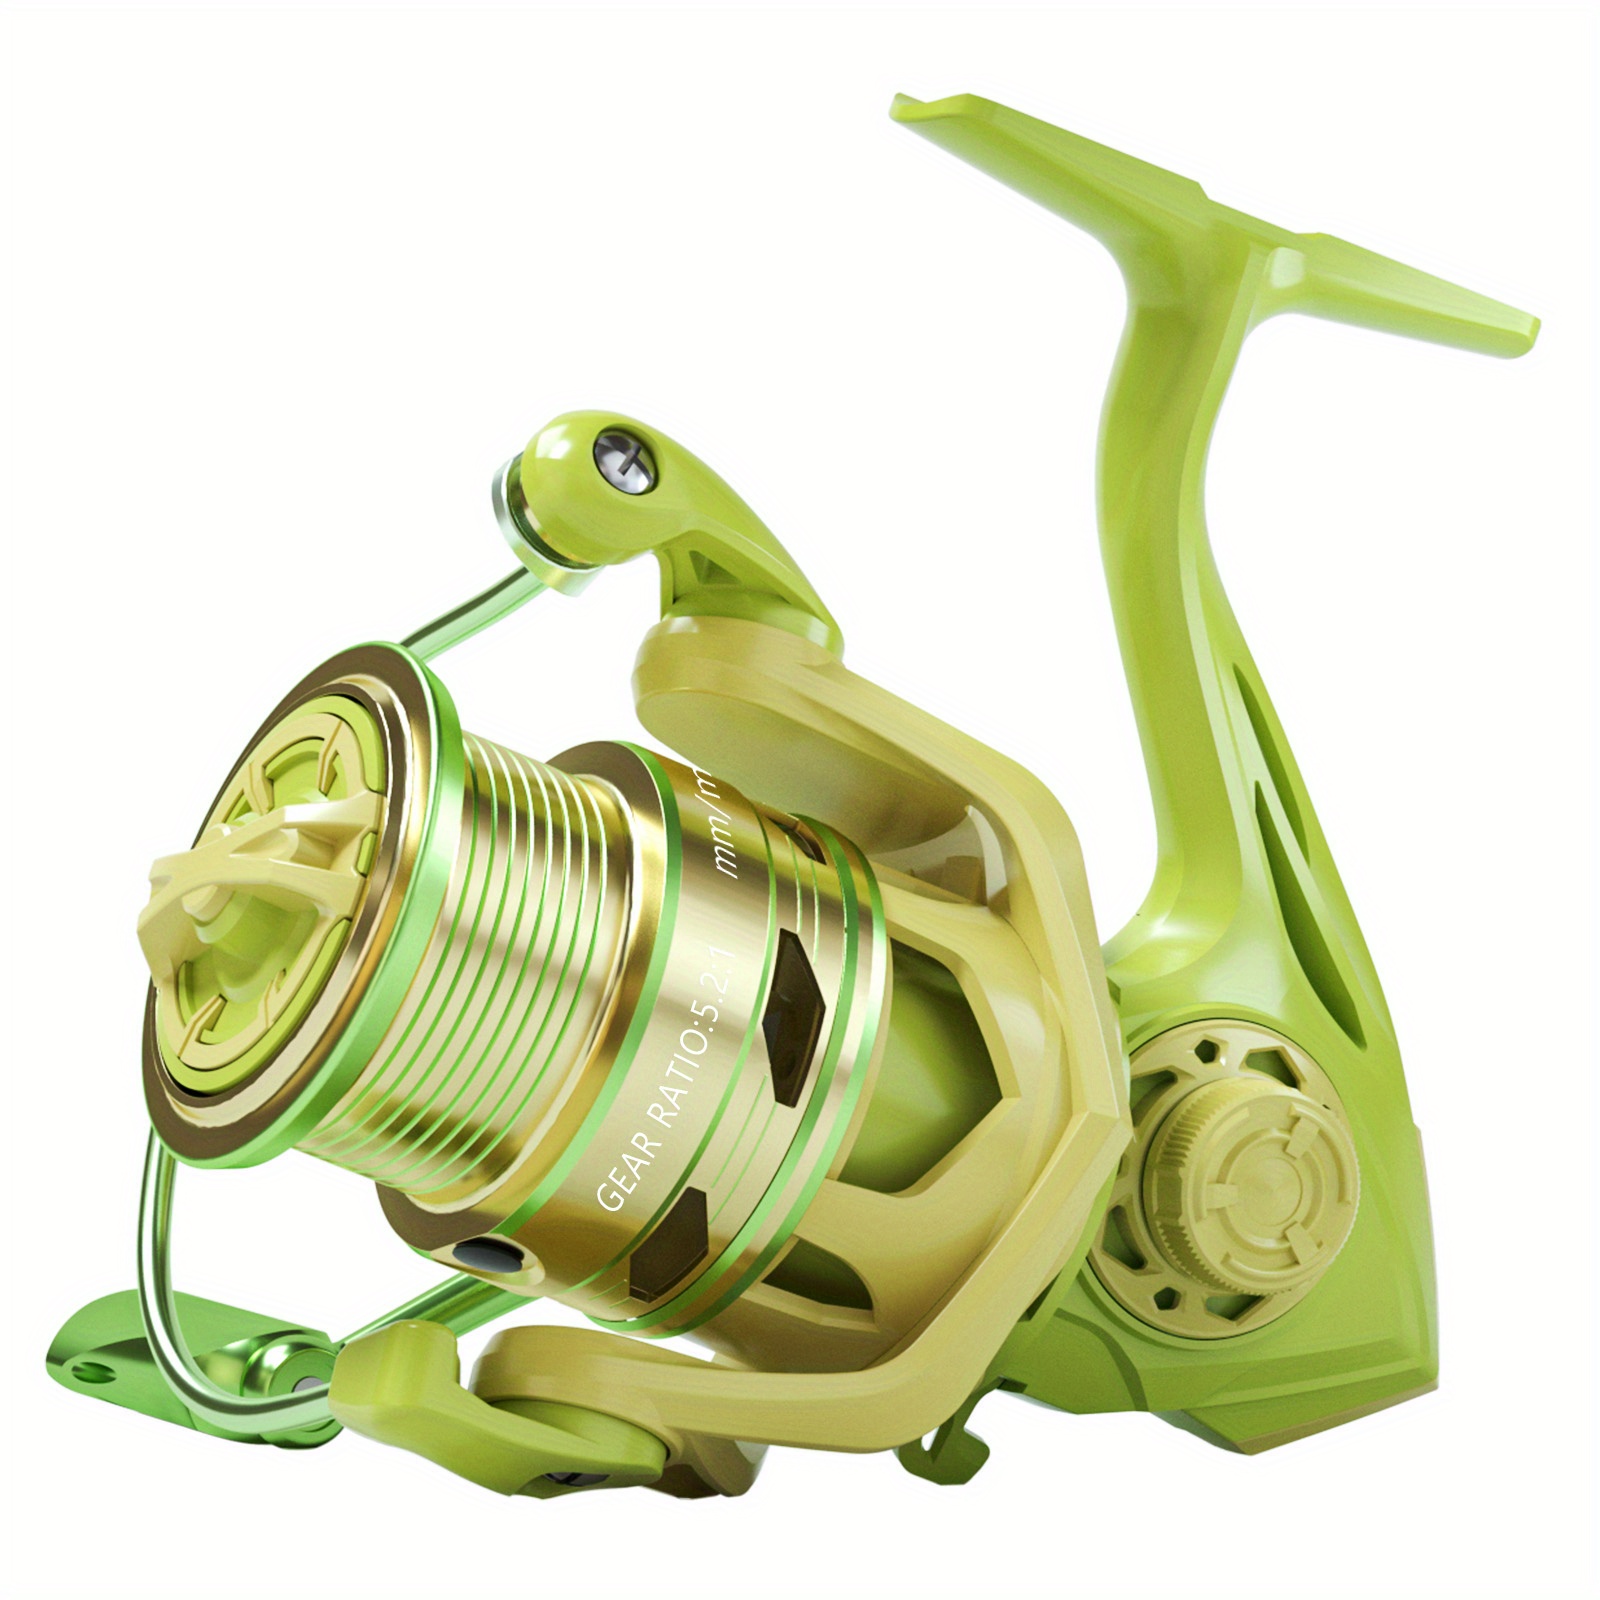 New Spinning Fishing Reel Professional Fishing Coil Wooden Handshake 12+1  BB Left/Right Hand Fishing Reel Wheels (Color : Fishing Reel, Size : 5000